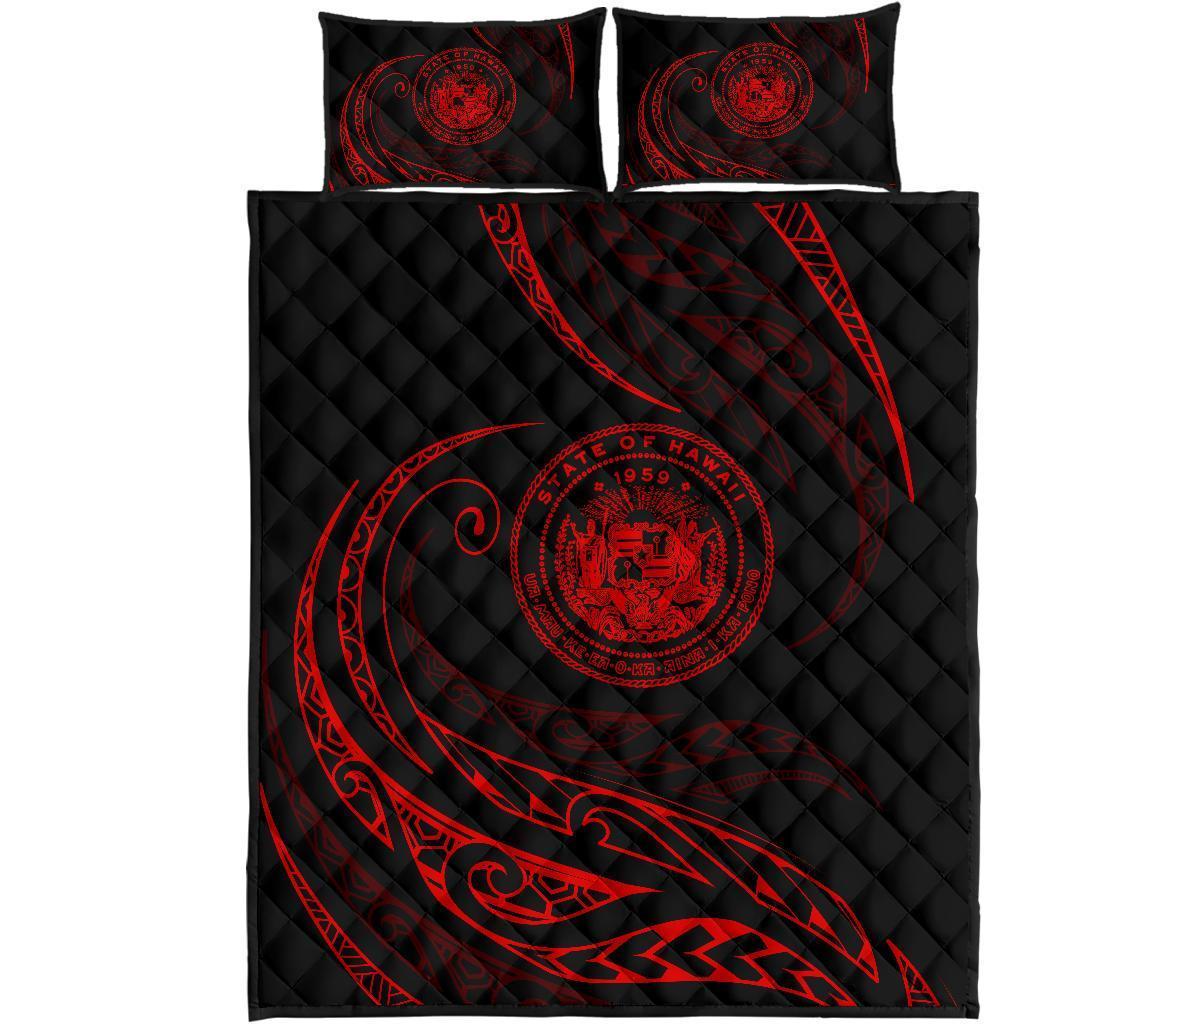 Hawaii Coat Of Arms Quilt Bed Set - Red - Frida Style Black - Polynesian Pride